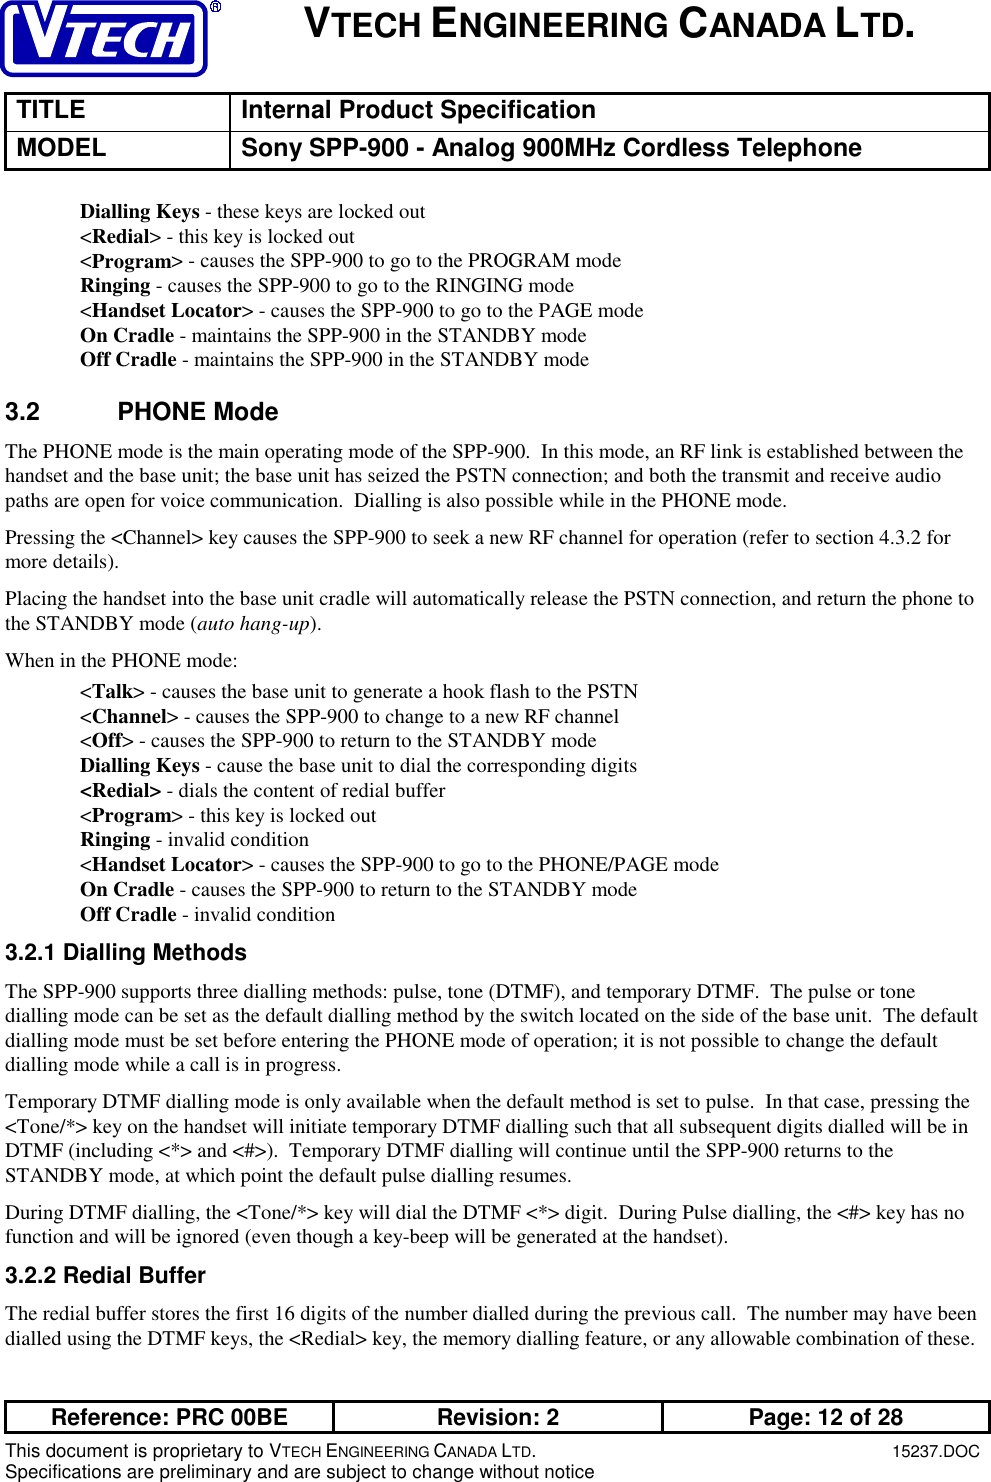 VTECH ENGINEERING CANADA LTD.TITLE Internal Product SpecificationMODEL Sony SPP-900 - Analog 900MHz Cordless TelephoneReference: PRC 00BE Revision: 2 Page: 12 of 28This document is proprietary to VTECH ENGINEERING CANADA LTD.15237.DOCSpecifications are preliminary and are subject to change without noticeDialling Keys - these keys are locked out&lt;Redial&gt; - this key is locked out&lt;Program&gt; - causes the SPP-900 to go to the PROGRAM modeRinging - causes the SPP-900 to go to the RINGING mode&lt;Handset Locator&gt; - causes the SPP-900 to go to the PAGE modeOn Cradle - maintains the SPP-900 in the STANDBY modeOff Cradle - maintains the SPP-900 in the STANDBY mode3.2 PHONE ModeThe PHONE mode is the main operating mode of the SPP-900.  In this mode, an RF link is established between thehandset and the base unit; the base unit has seized the PSTN connection; and both the transmit and receive audiopaths are open for voice communication.  Dialling is also possible while in the PHONE mode.Pressing the &lt;Channel&gt; key causes the SPP-900 to seek a new RF channel for operation (refer to section 4.3.2 formore details).Placing the handset into the base unit cradle will automatically release the PSTN connection, and return the phone tothe STANDBY mode (auto hang-up).When in the PHONE mode:&lt;Talk&gt; - causes the base unit to generate a hook flash to the PSTN&lt;Channel&gt; - causes the SPP-900 to change to a new RF channel&lt;Off&gt; - causes the SPP-900 to return to the STANDBY modeDialling Keys - cause the base unit to dial the corresponding digits&lt;Redial&gt; - dials the content of redial buffer&lt;Program&gt; - this key is locked outRinging - invalid condition&lt;Handset Locator&gt; - causes the SPP-900 to go to the PHONE/PAGE modeOn Cradle - causes the SPP-900 to return to the STANDBY modeOff Cradle - invalid condition3.2.1 Dialling MethodsThe SPP-900 supports three dialling methods: pulse, tone (DTMF), and temporary DTMF.  The pulse or tonedialling mode can be set as the default dialling method by the switch located on the side of the base unit.  The defaultdialling mode must be set before entering the PHONE mode of operation; it is not possible to change the defaultdialling mode while a call is in progress.Temporary DTMF dialling mode is only available when the default method is set to pulse.  In that case, pressing the&lt;Tone/*&gt; key on the handset will initiate temporary DTMF dialling such that all subsequent digits dialled will be inDTMF (including &lt;*&gt; and &lt;#&gt;).  Temporary DTMF dialling will continue until the SPP-900 returns to theSTANDBY mode, at which point the default pulse dialling resumes.During DTMF dialling, the &lt;Tone/*&gt; key will dial the DTMF &lt;*&gt; digit.  During Pulse dialling, the &lt;#&gt; key has nofunction and will be ignored (even though a key-beep will be generated at the handset).3.2.2 Redial BufferThe redial buffer stores the first 16 digits of the number dialled during the previous call.  The number may have beendialled using the DTMF keys, the &lt;Redial&gt; key, the memory dialling feature, or any allowable combination of these.